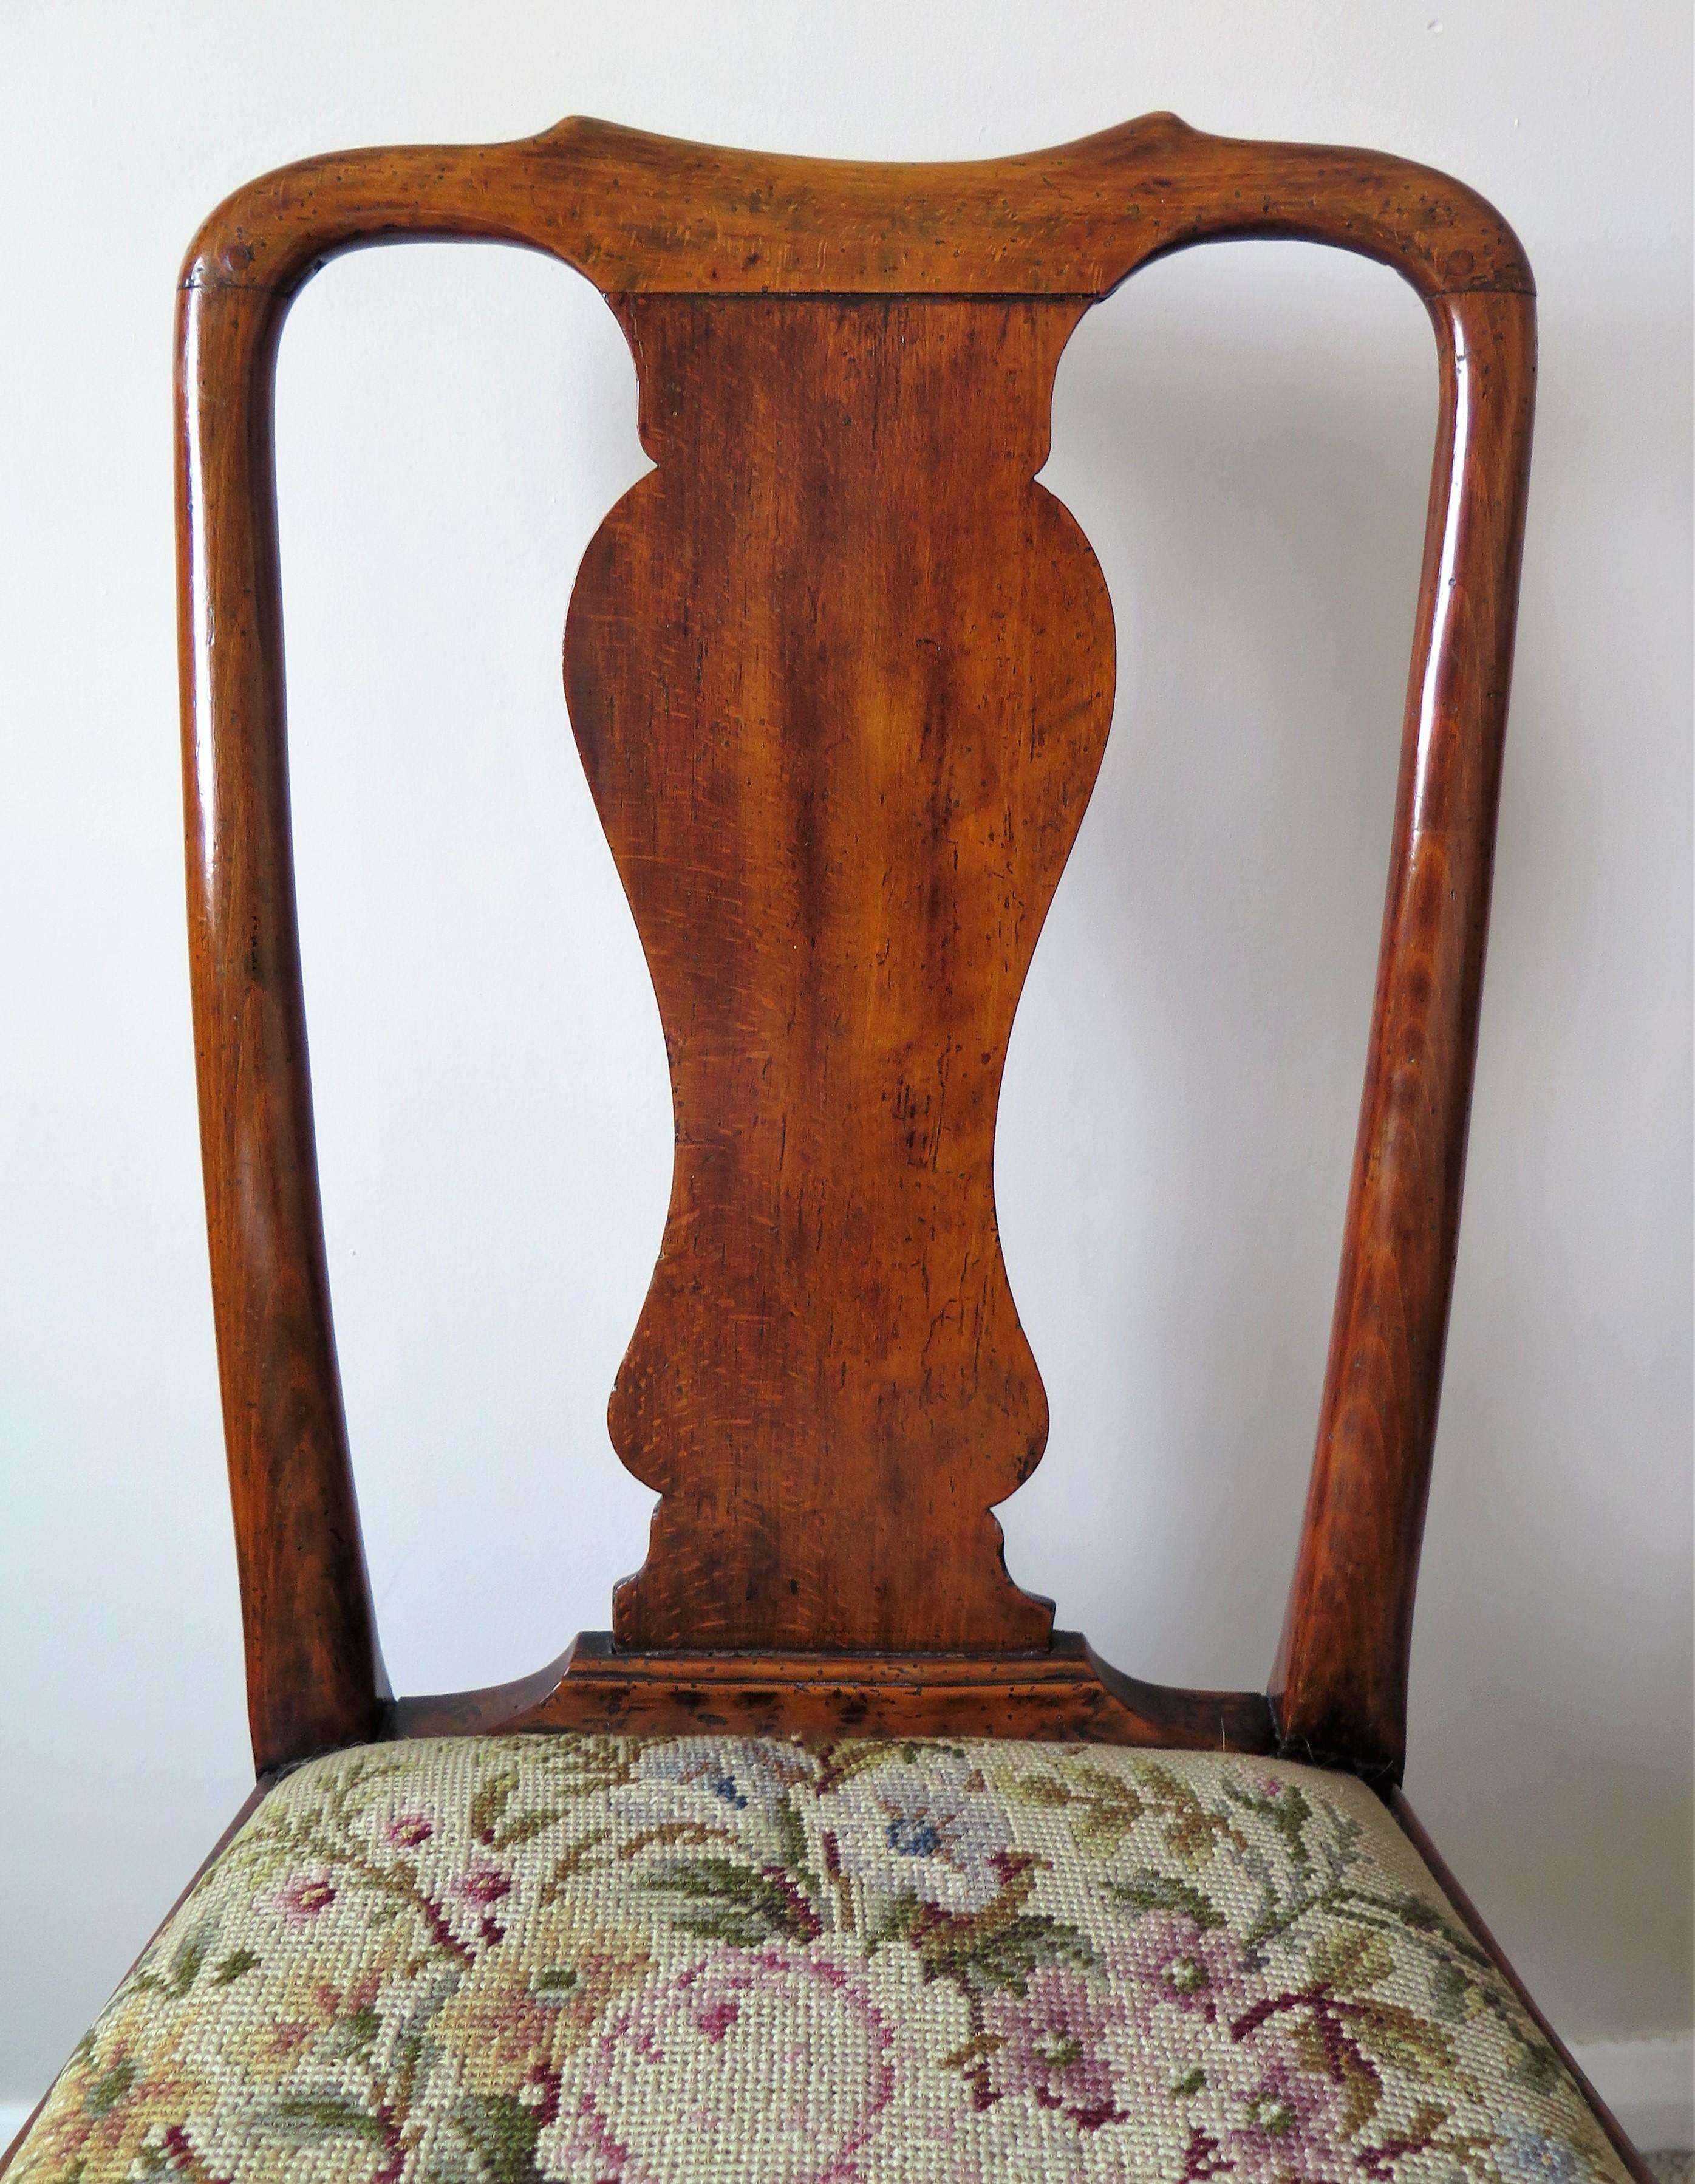 Queen Anne Period Walnut Chair Cabriole Legs and Stretchers, English circa 1700 For Sale 3